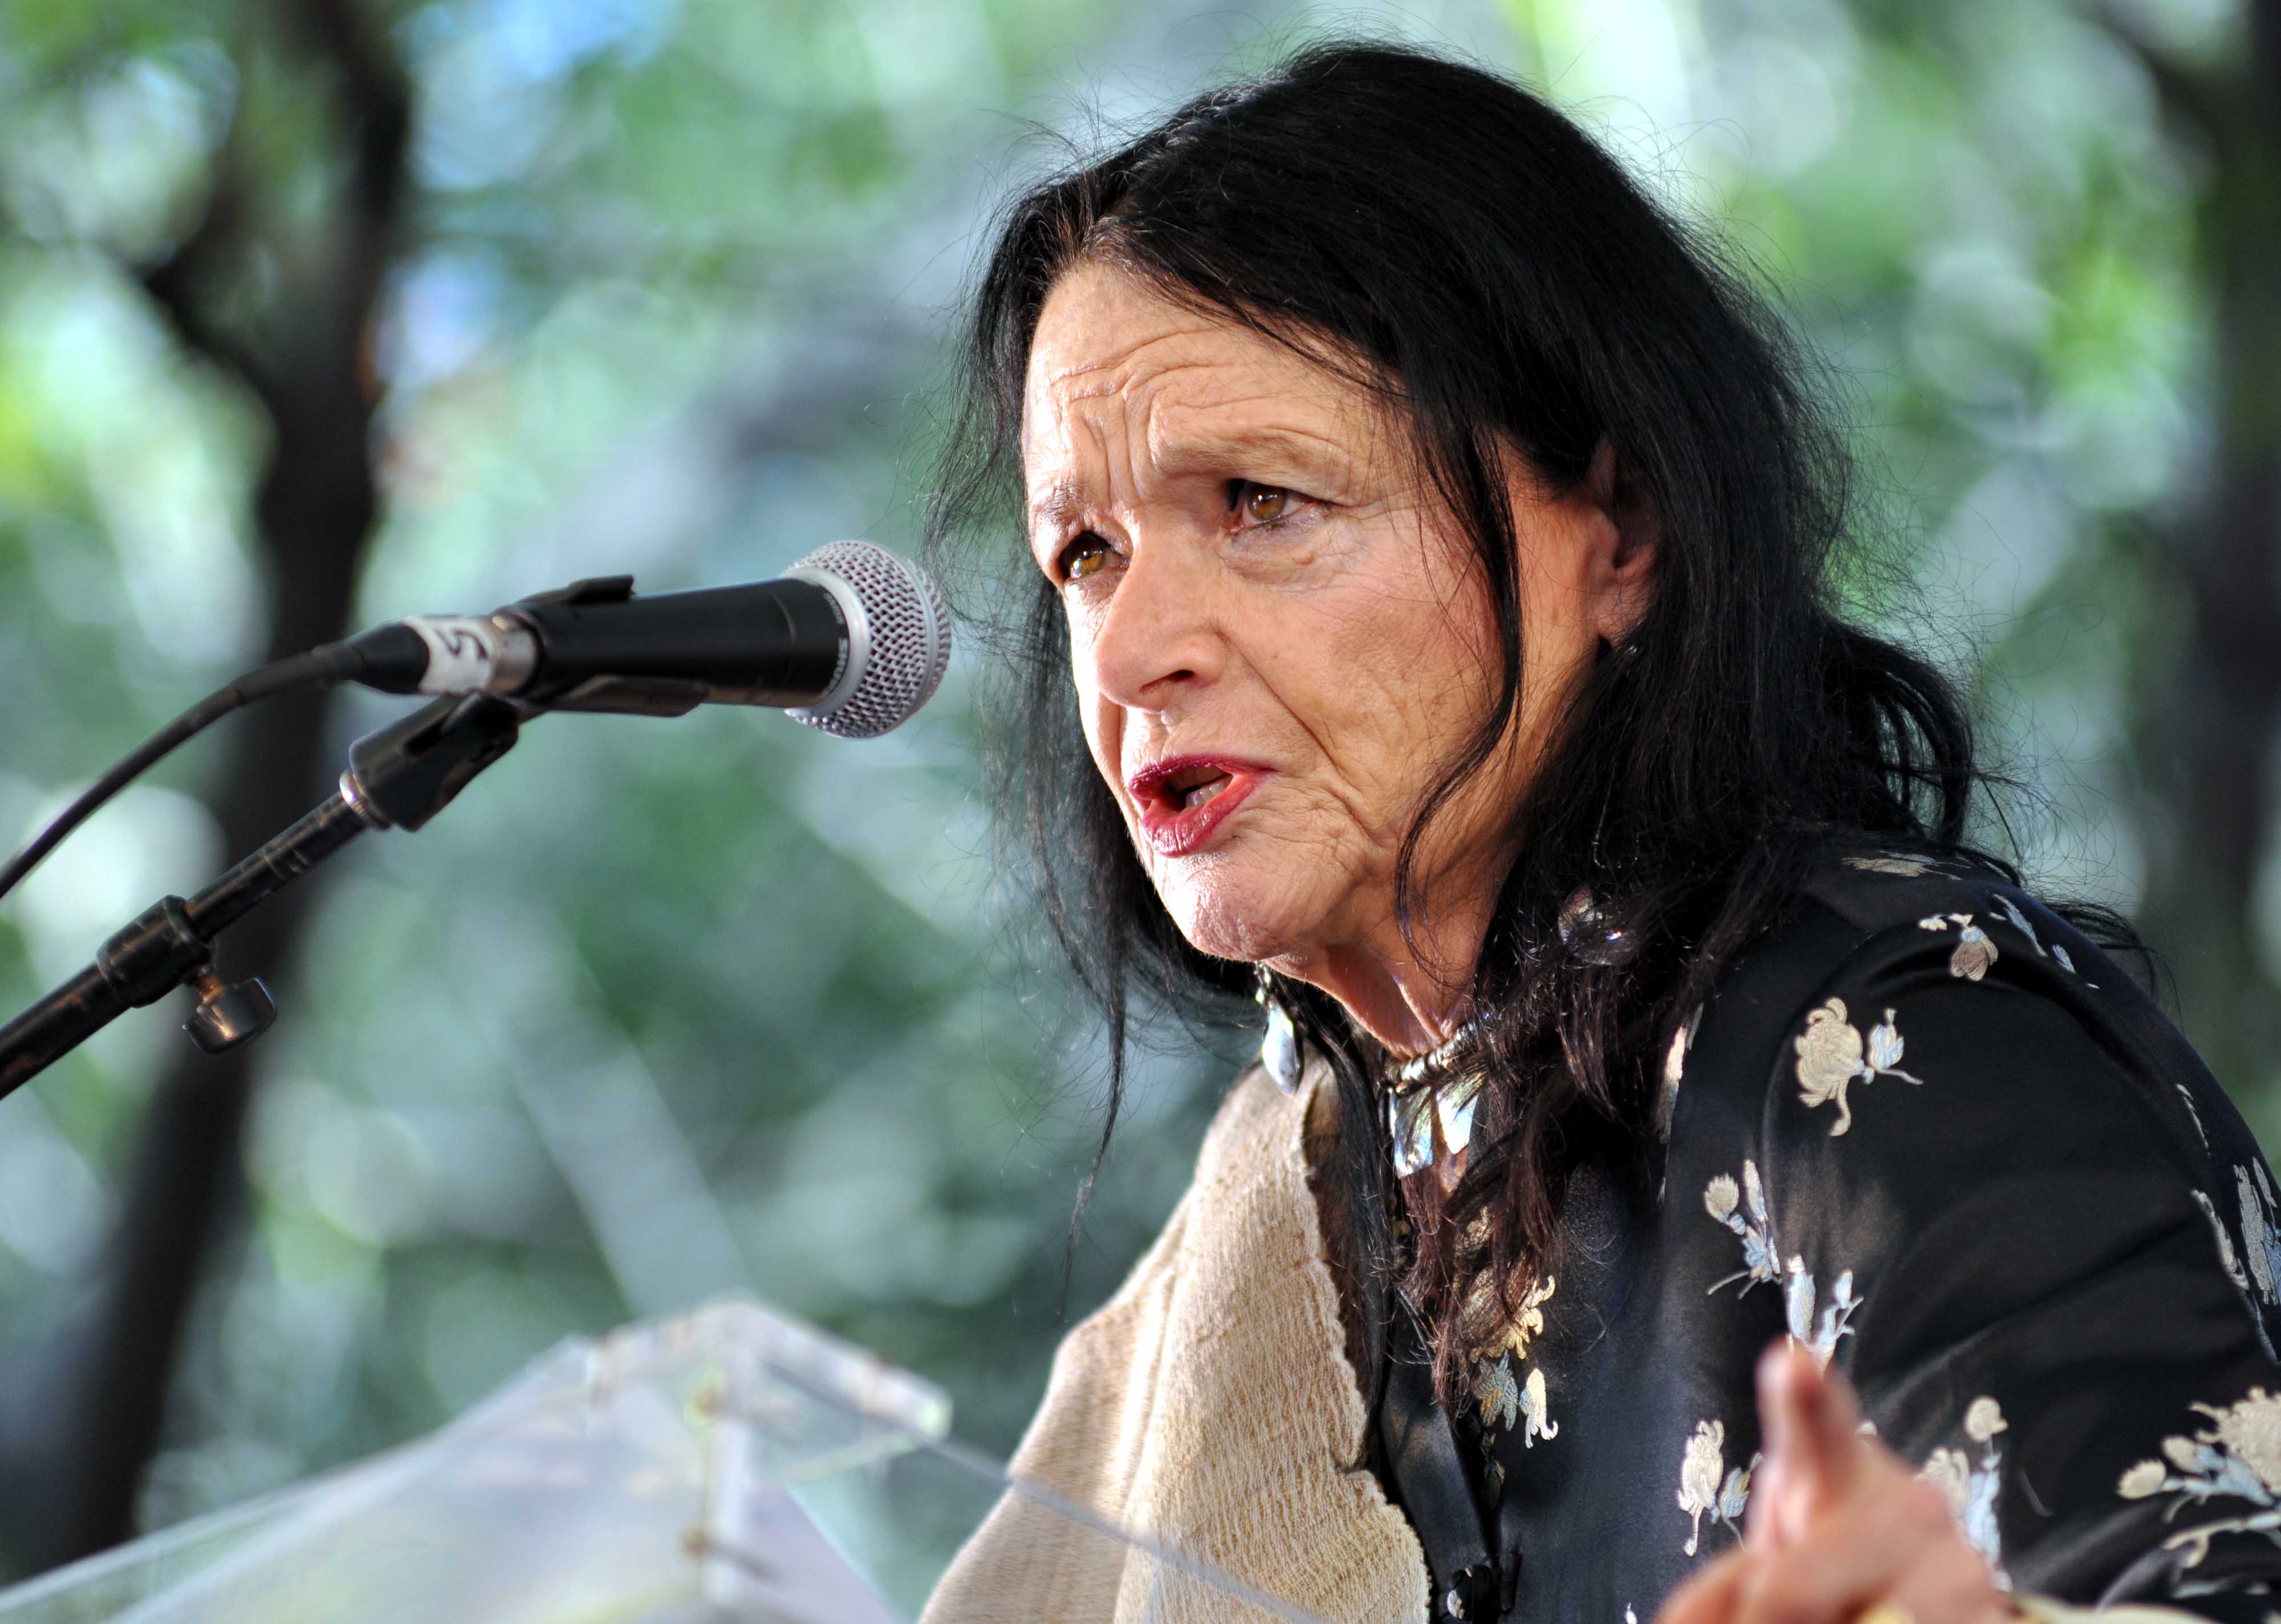 Famous poem 'Anthropocene Blue' was passionately recited by the world-famous American poet Anne Waldman.